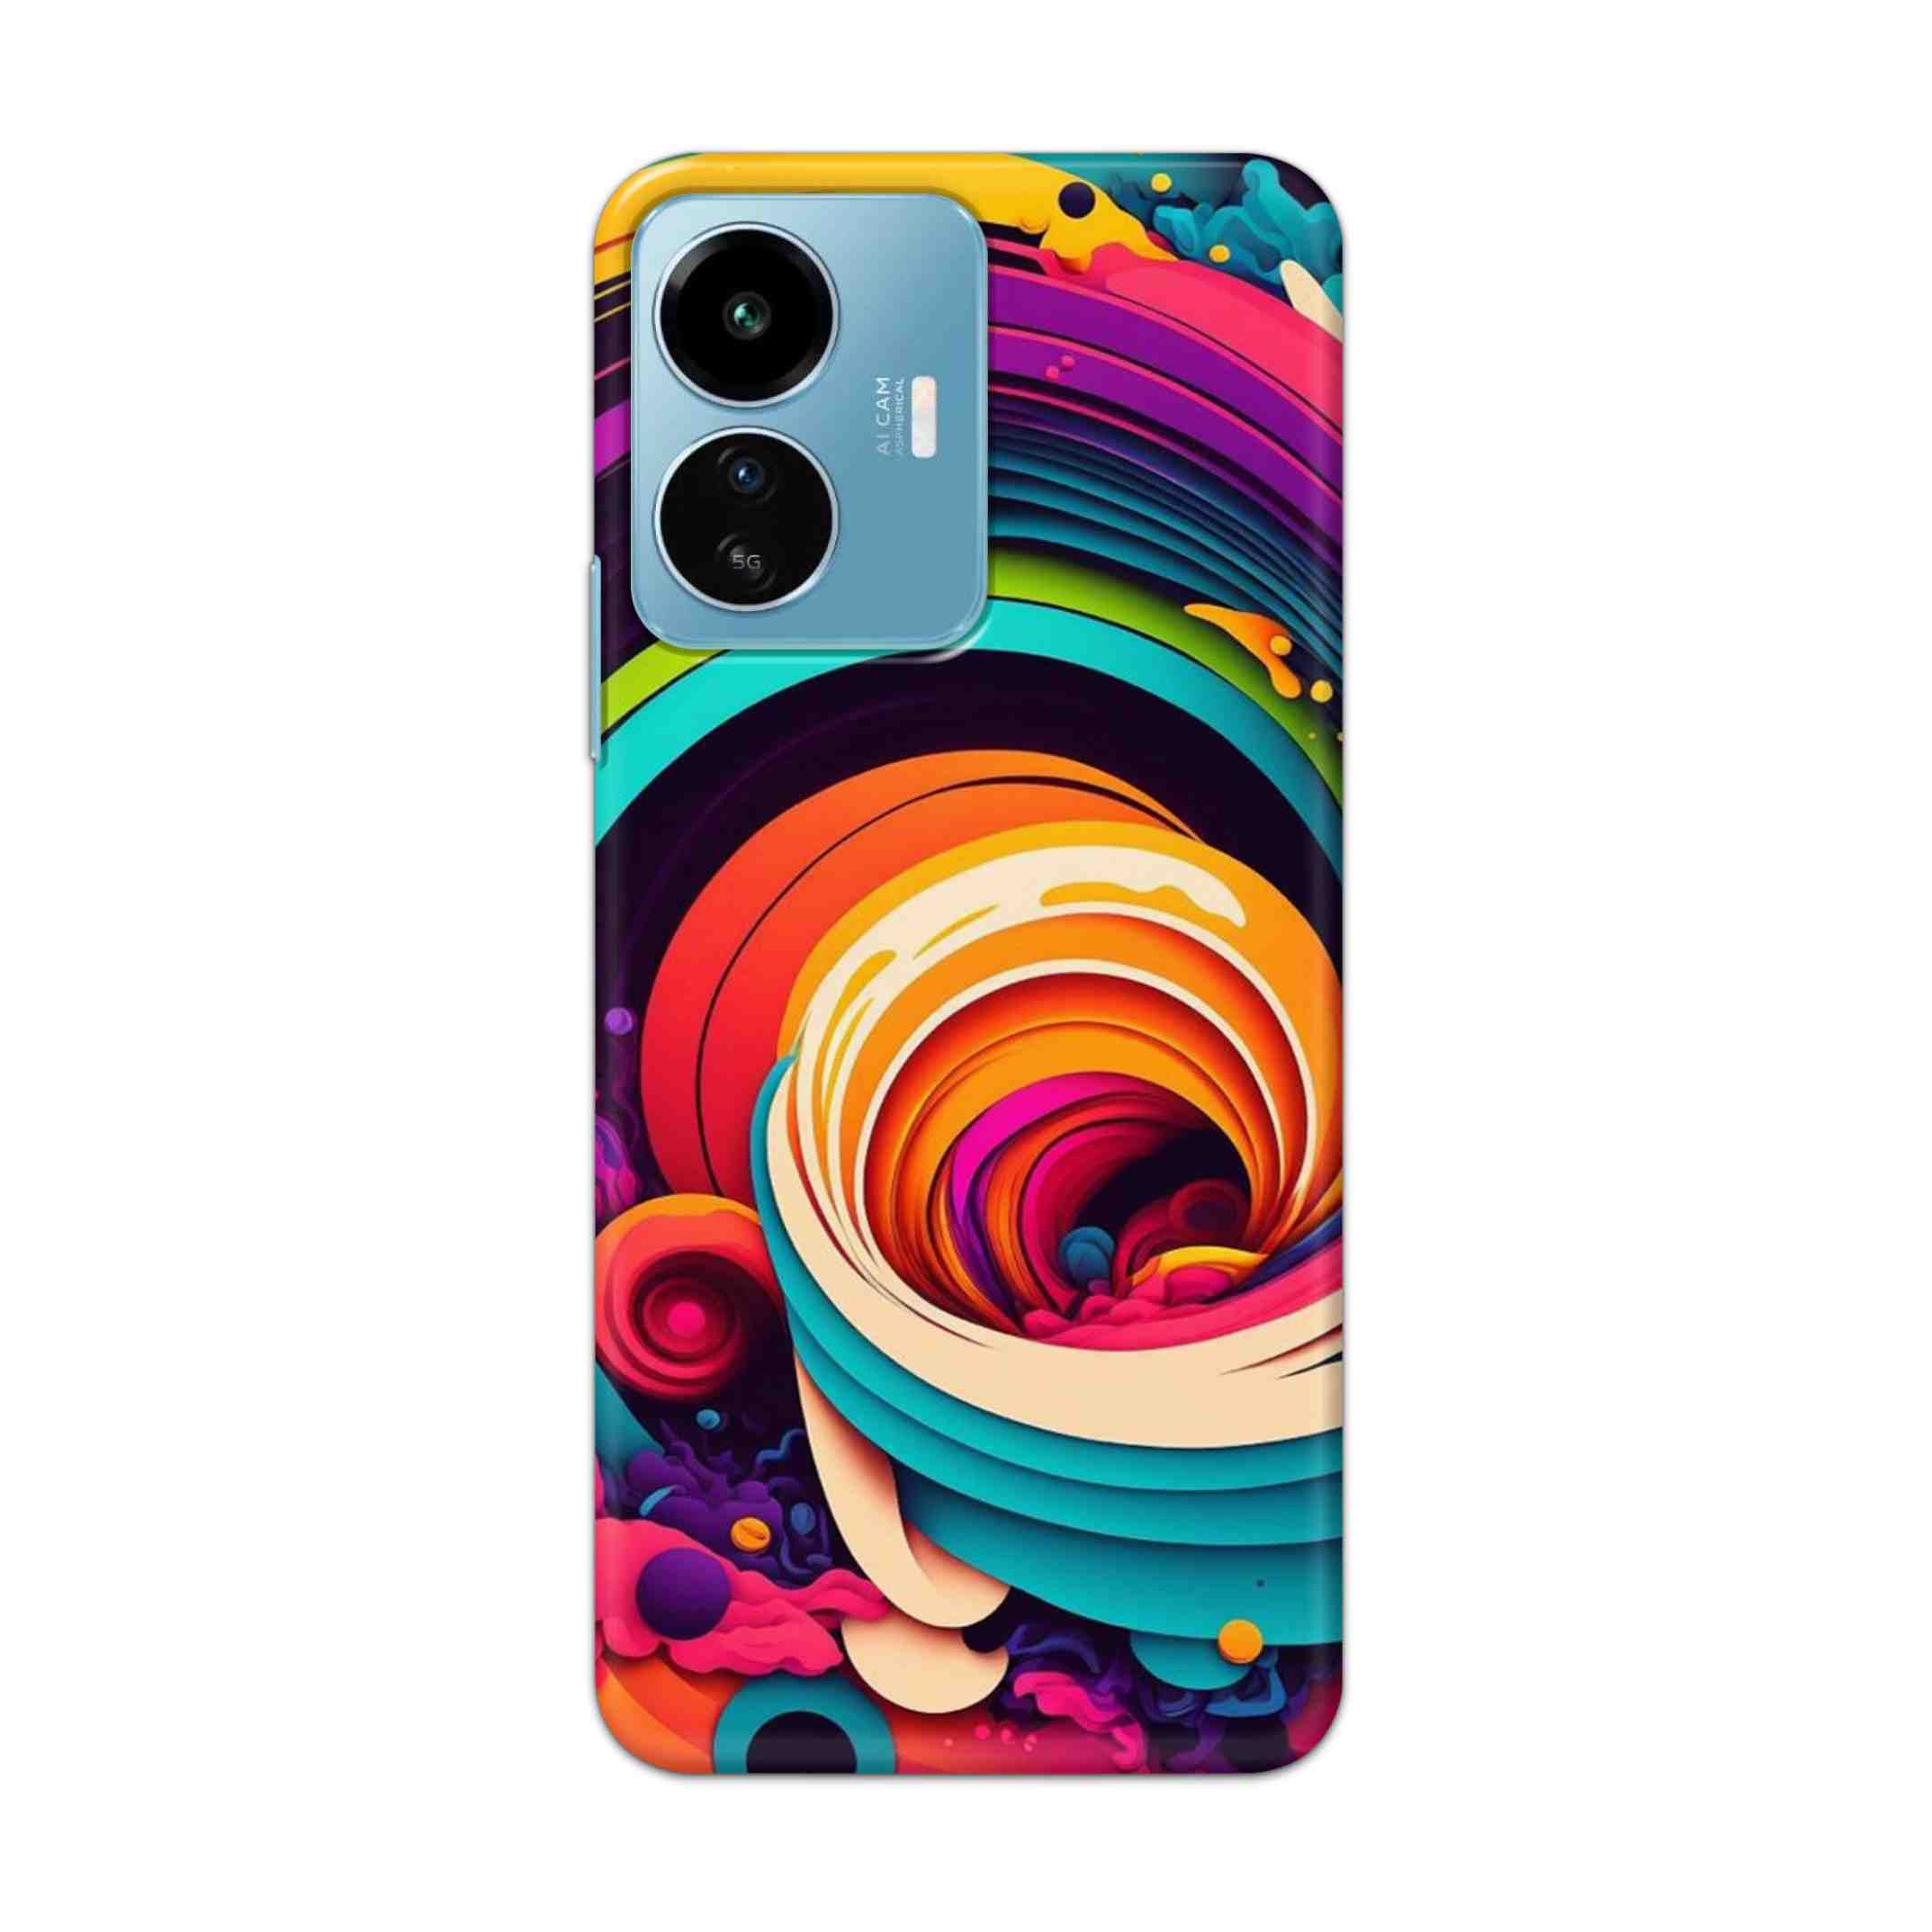 Buy Colour Circle Hard Back Mobile Phone Case Cover For IQOO Z6 Lite 5G Online